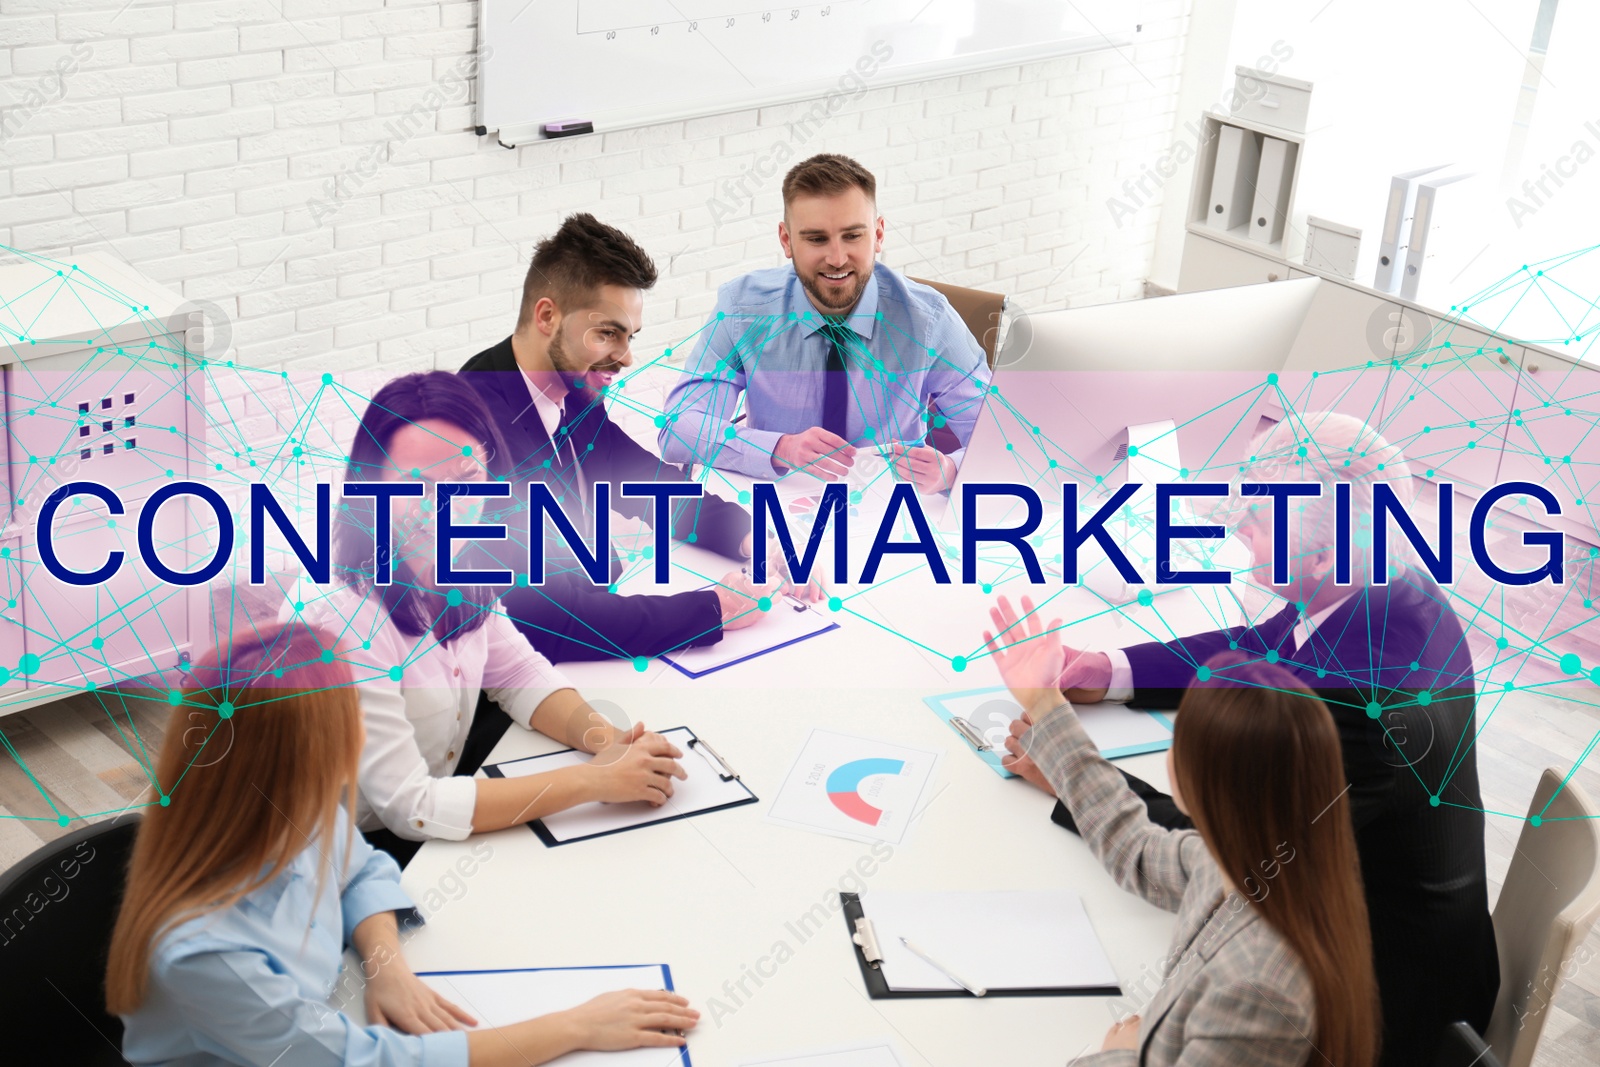 Image of Content marketing strategy. Team of professionals working together at table in office